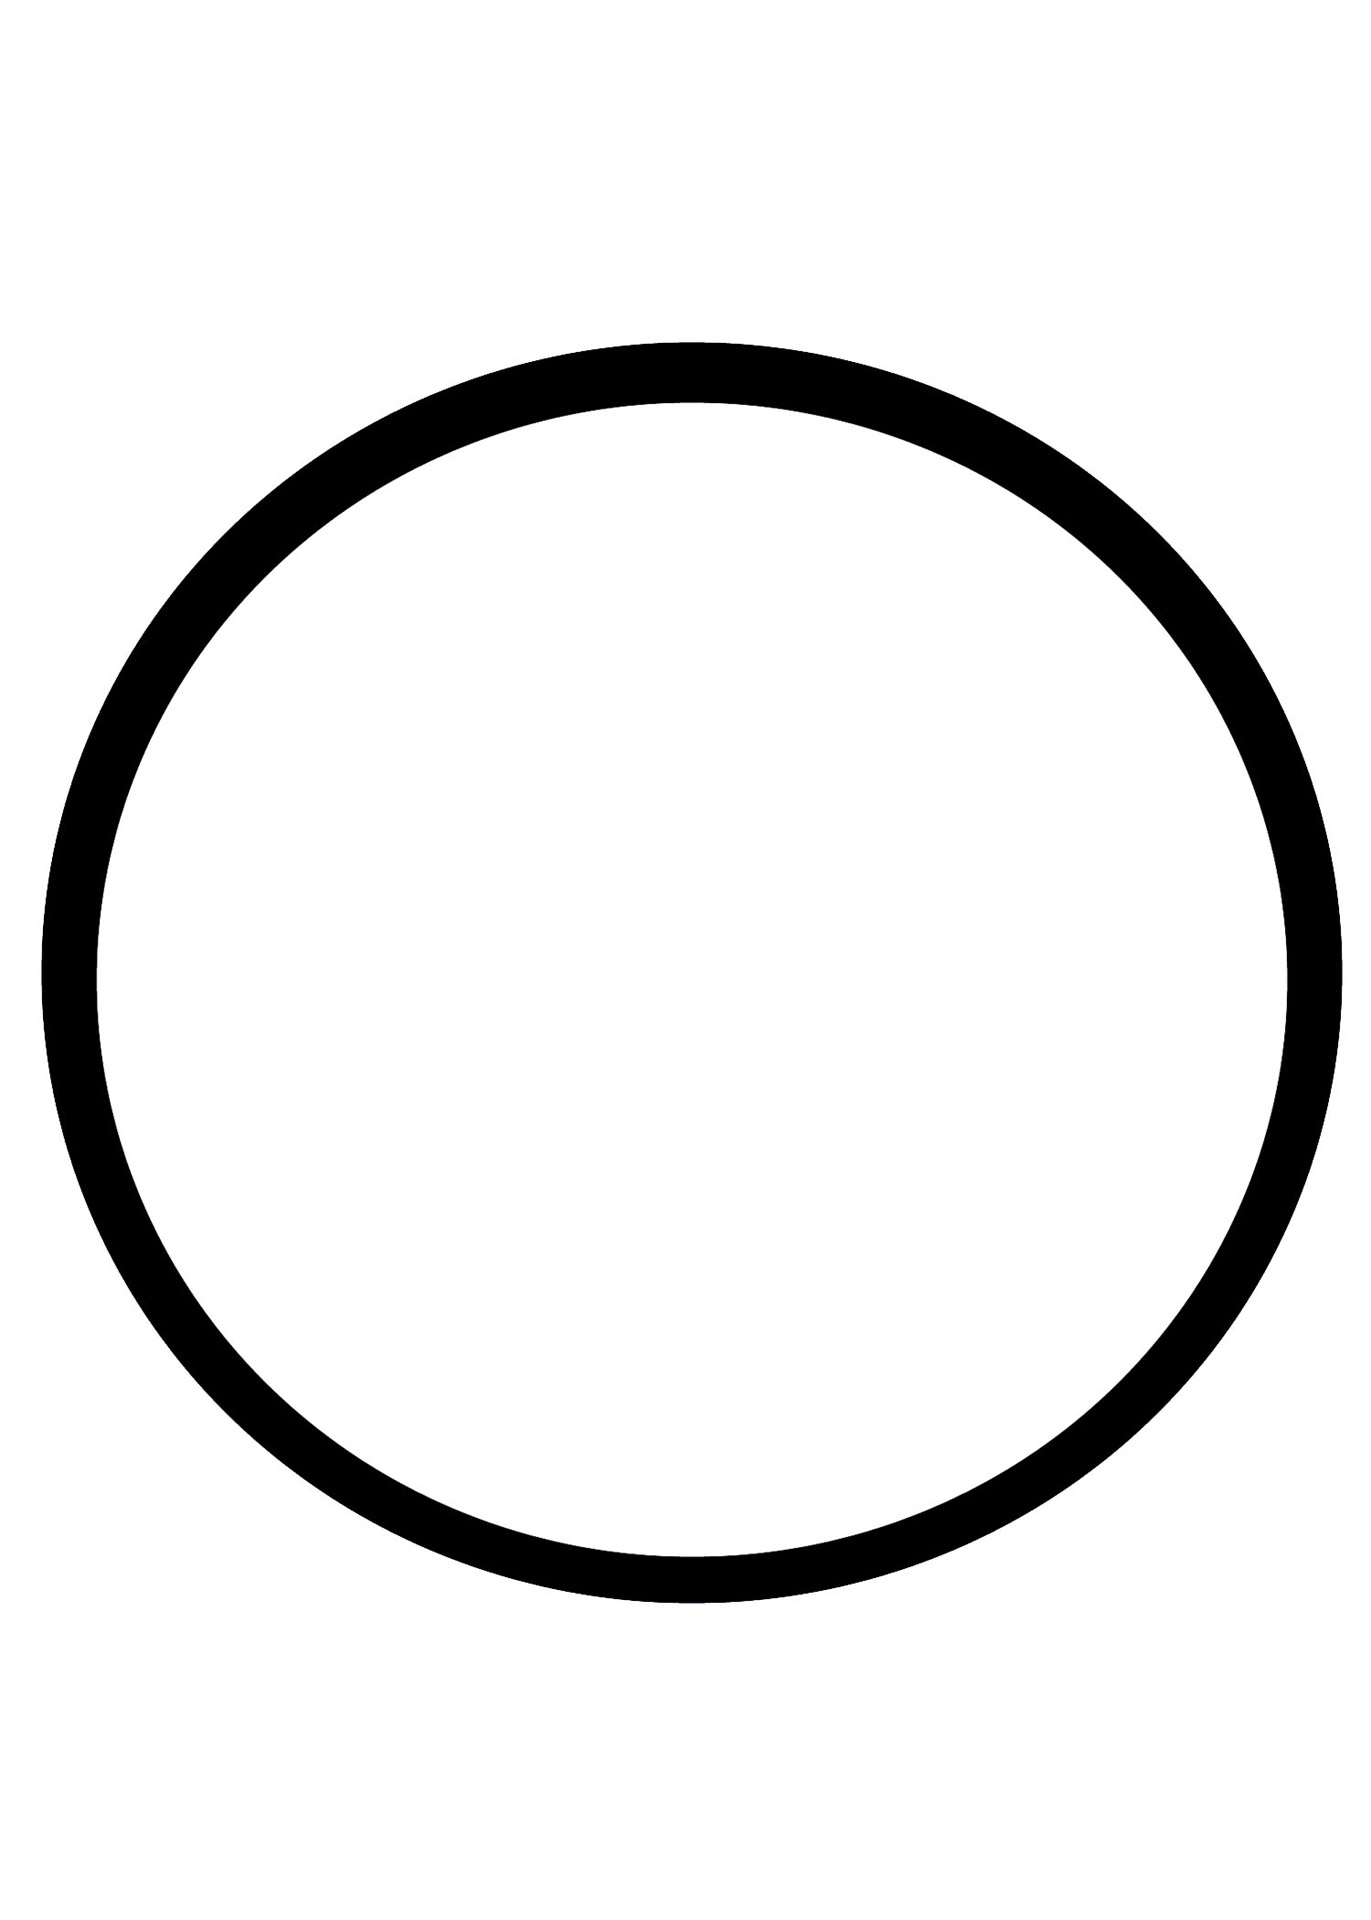 Basic Circle Outline Free Stock Photo - Public Domain Pictures